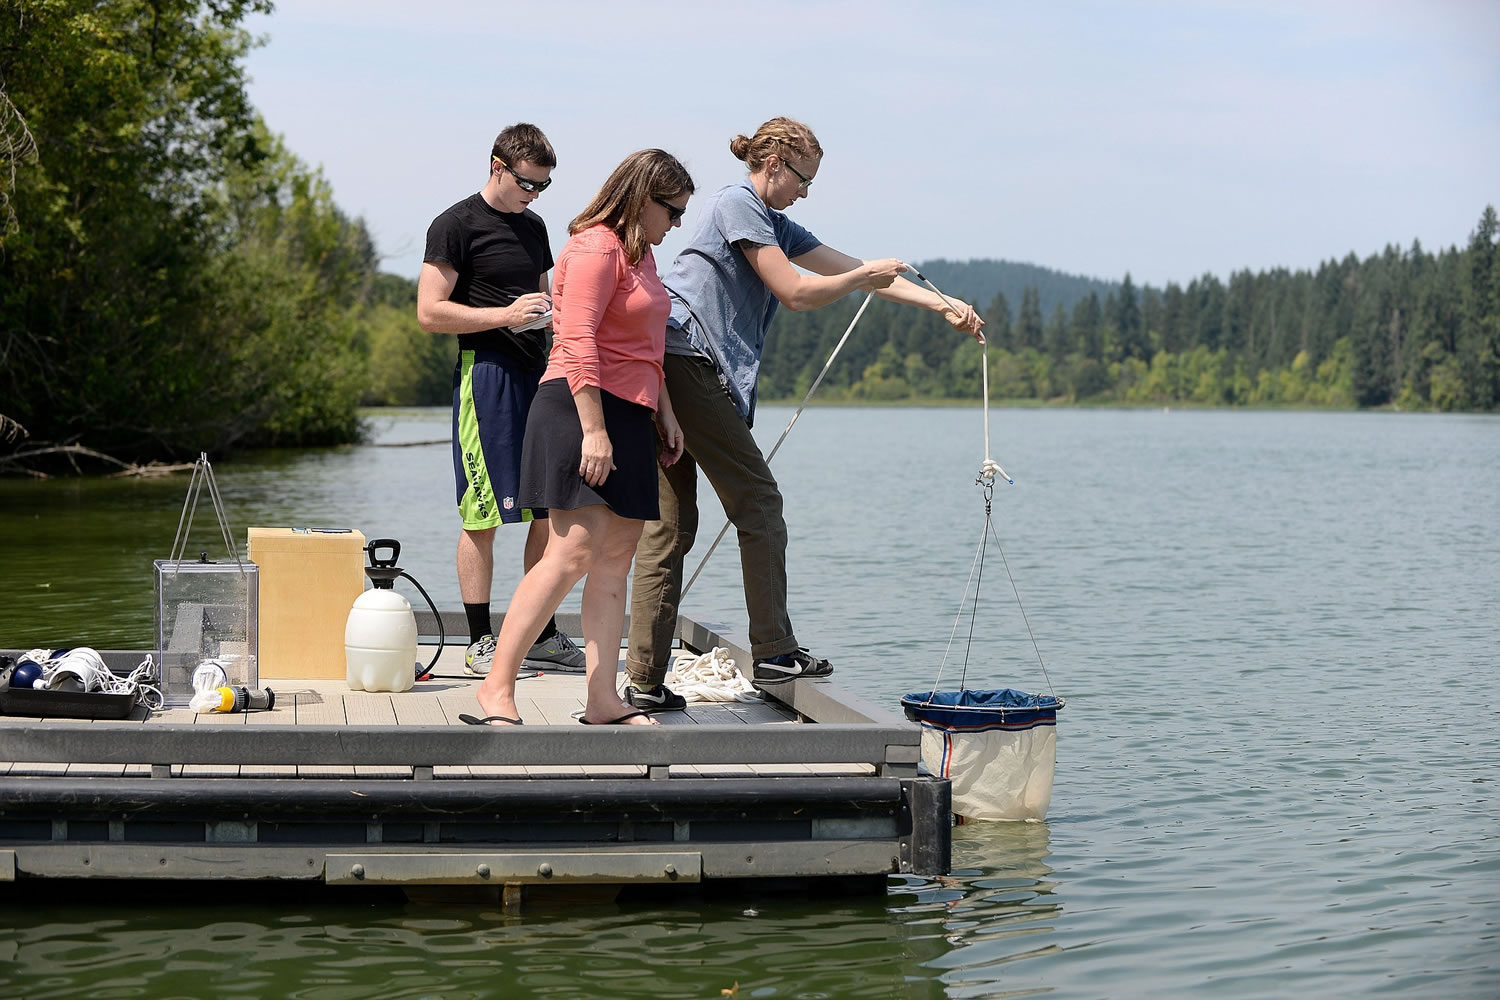 Photos by Amanda Cowan/The Columbian
University of Portland student Matt Perry, from left, joins Washington State University Vancouver professor Gretchen Rollwagen-Bollens and WSU Vancouver student Kate Perkins as she drops a plankton net to take samples in Lacamas Lake on Tuesday.